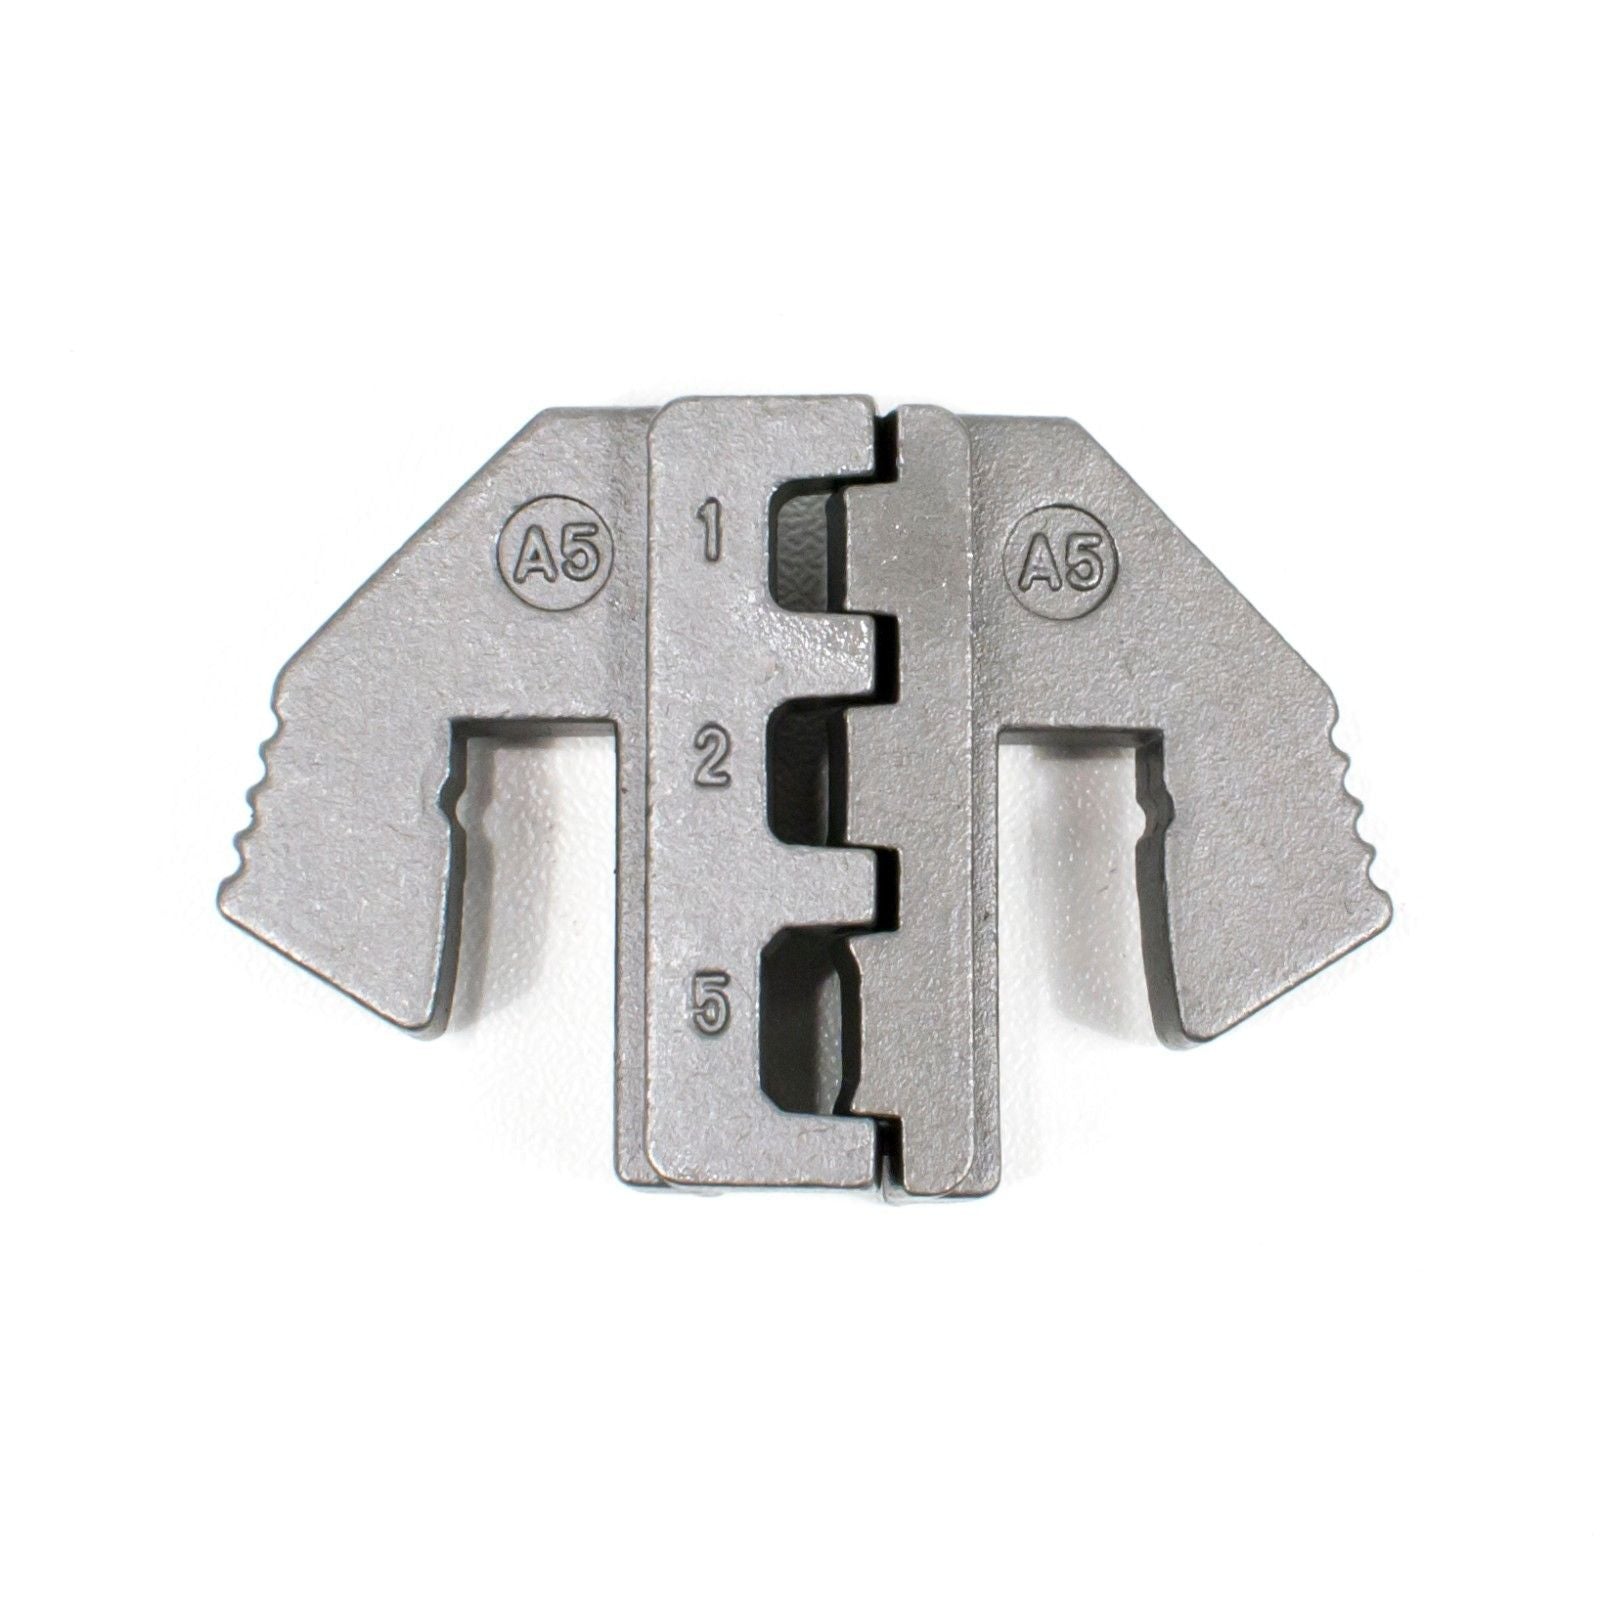 Crimping Tool Die - A5 Die for Closed End Connector & Heat Shrink Terminals - Tool Guy Republic